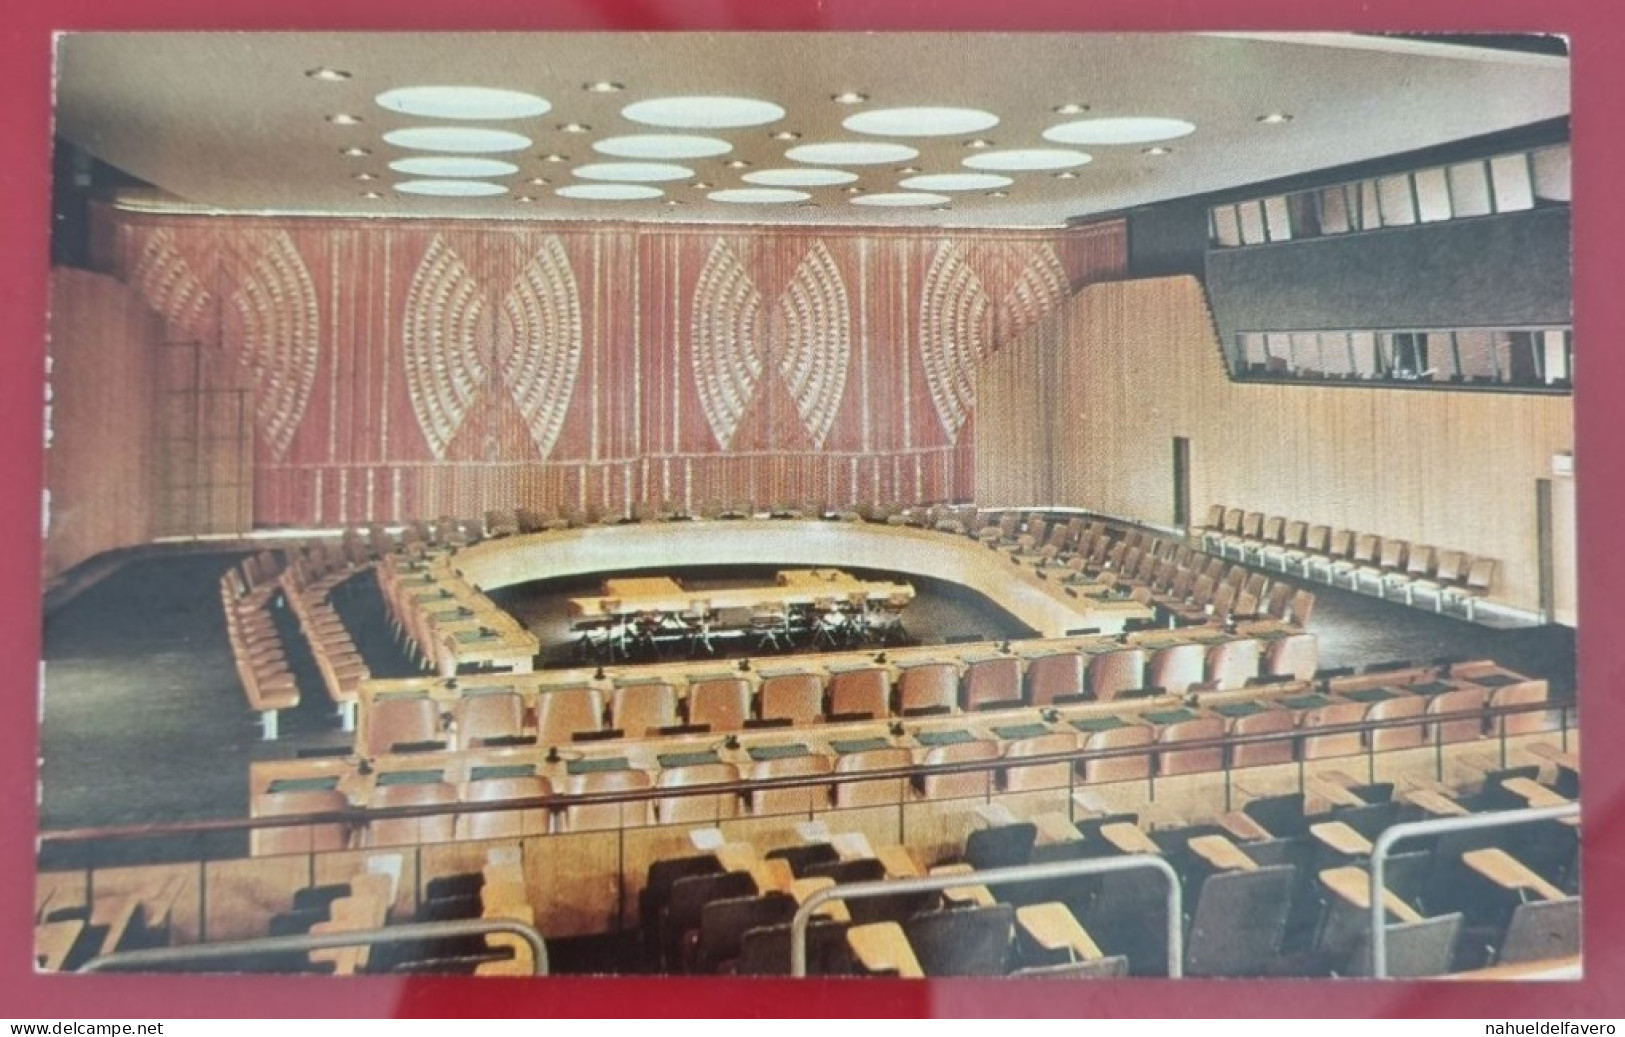 Uncirculated Postcard - USA - NY, NEW YORK CITY - UNITED NATIONS, ECONOMIC AND SOCIAL COUNCIL CHAMBER - Places & Squares